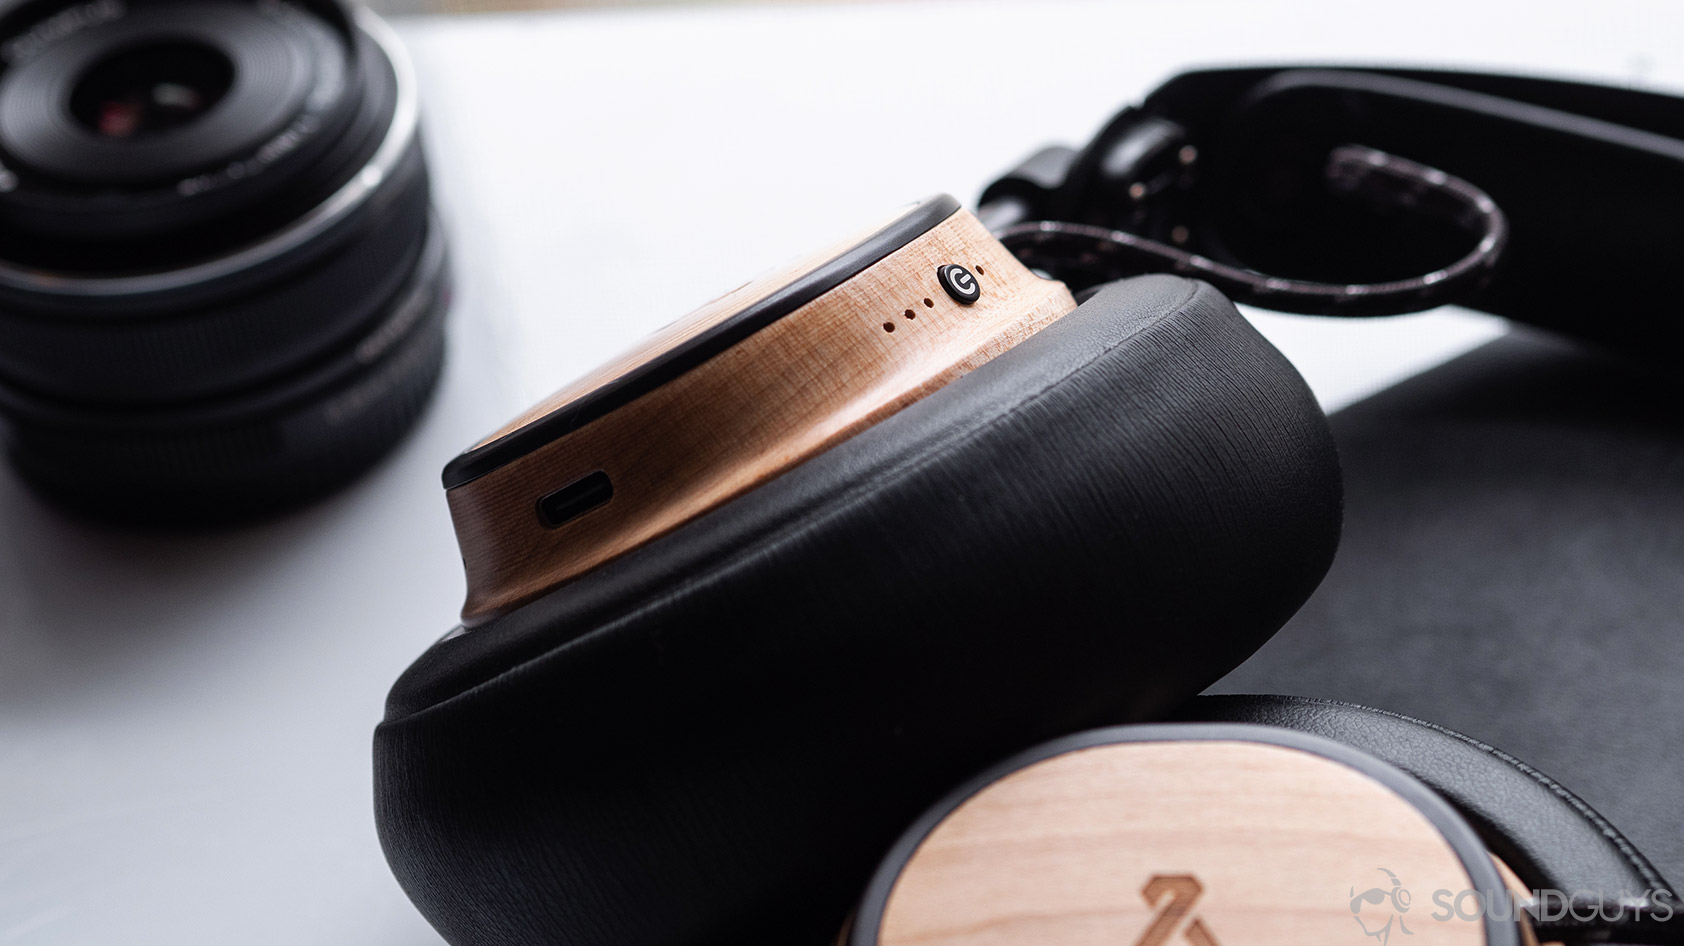 House of Marley Exodus: The power button and LED indicators on the left ear cup.